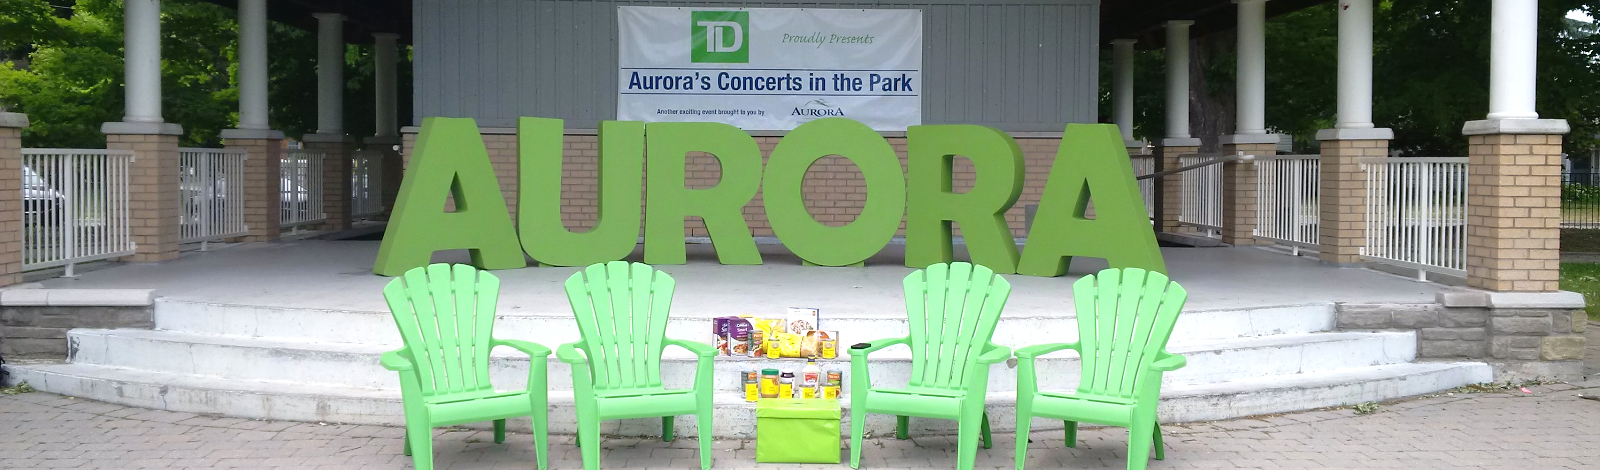 Concerts in the park stage with AURORA letters and green chairs